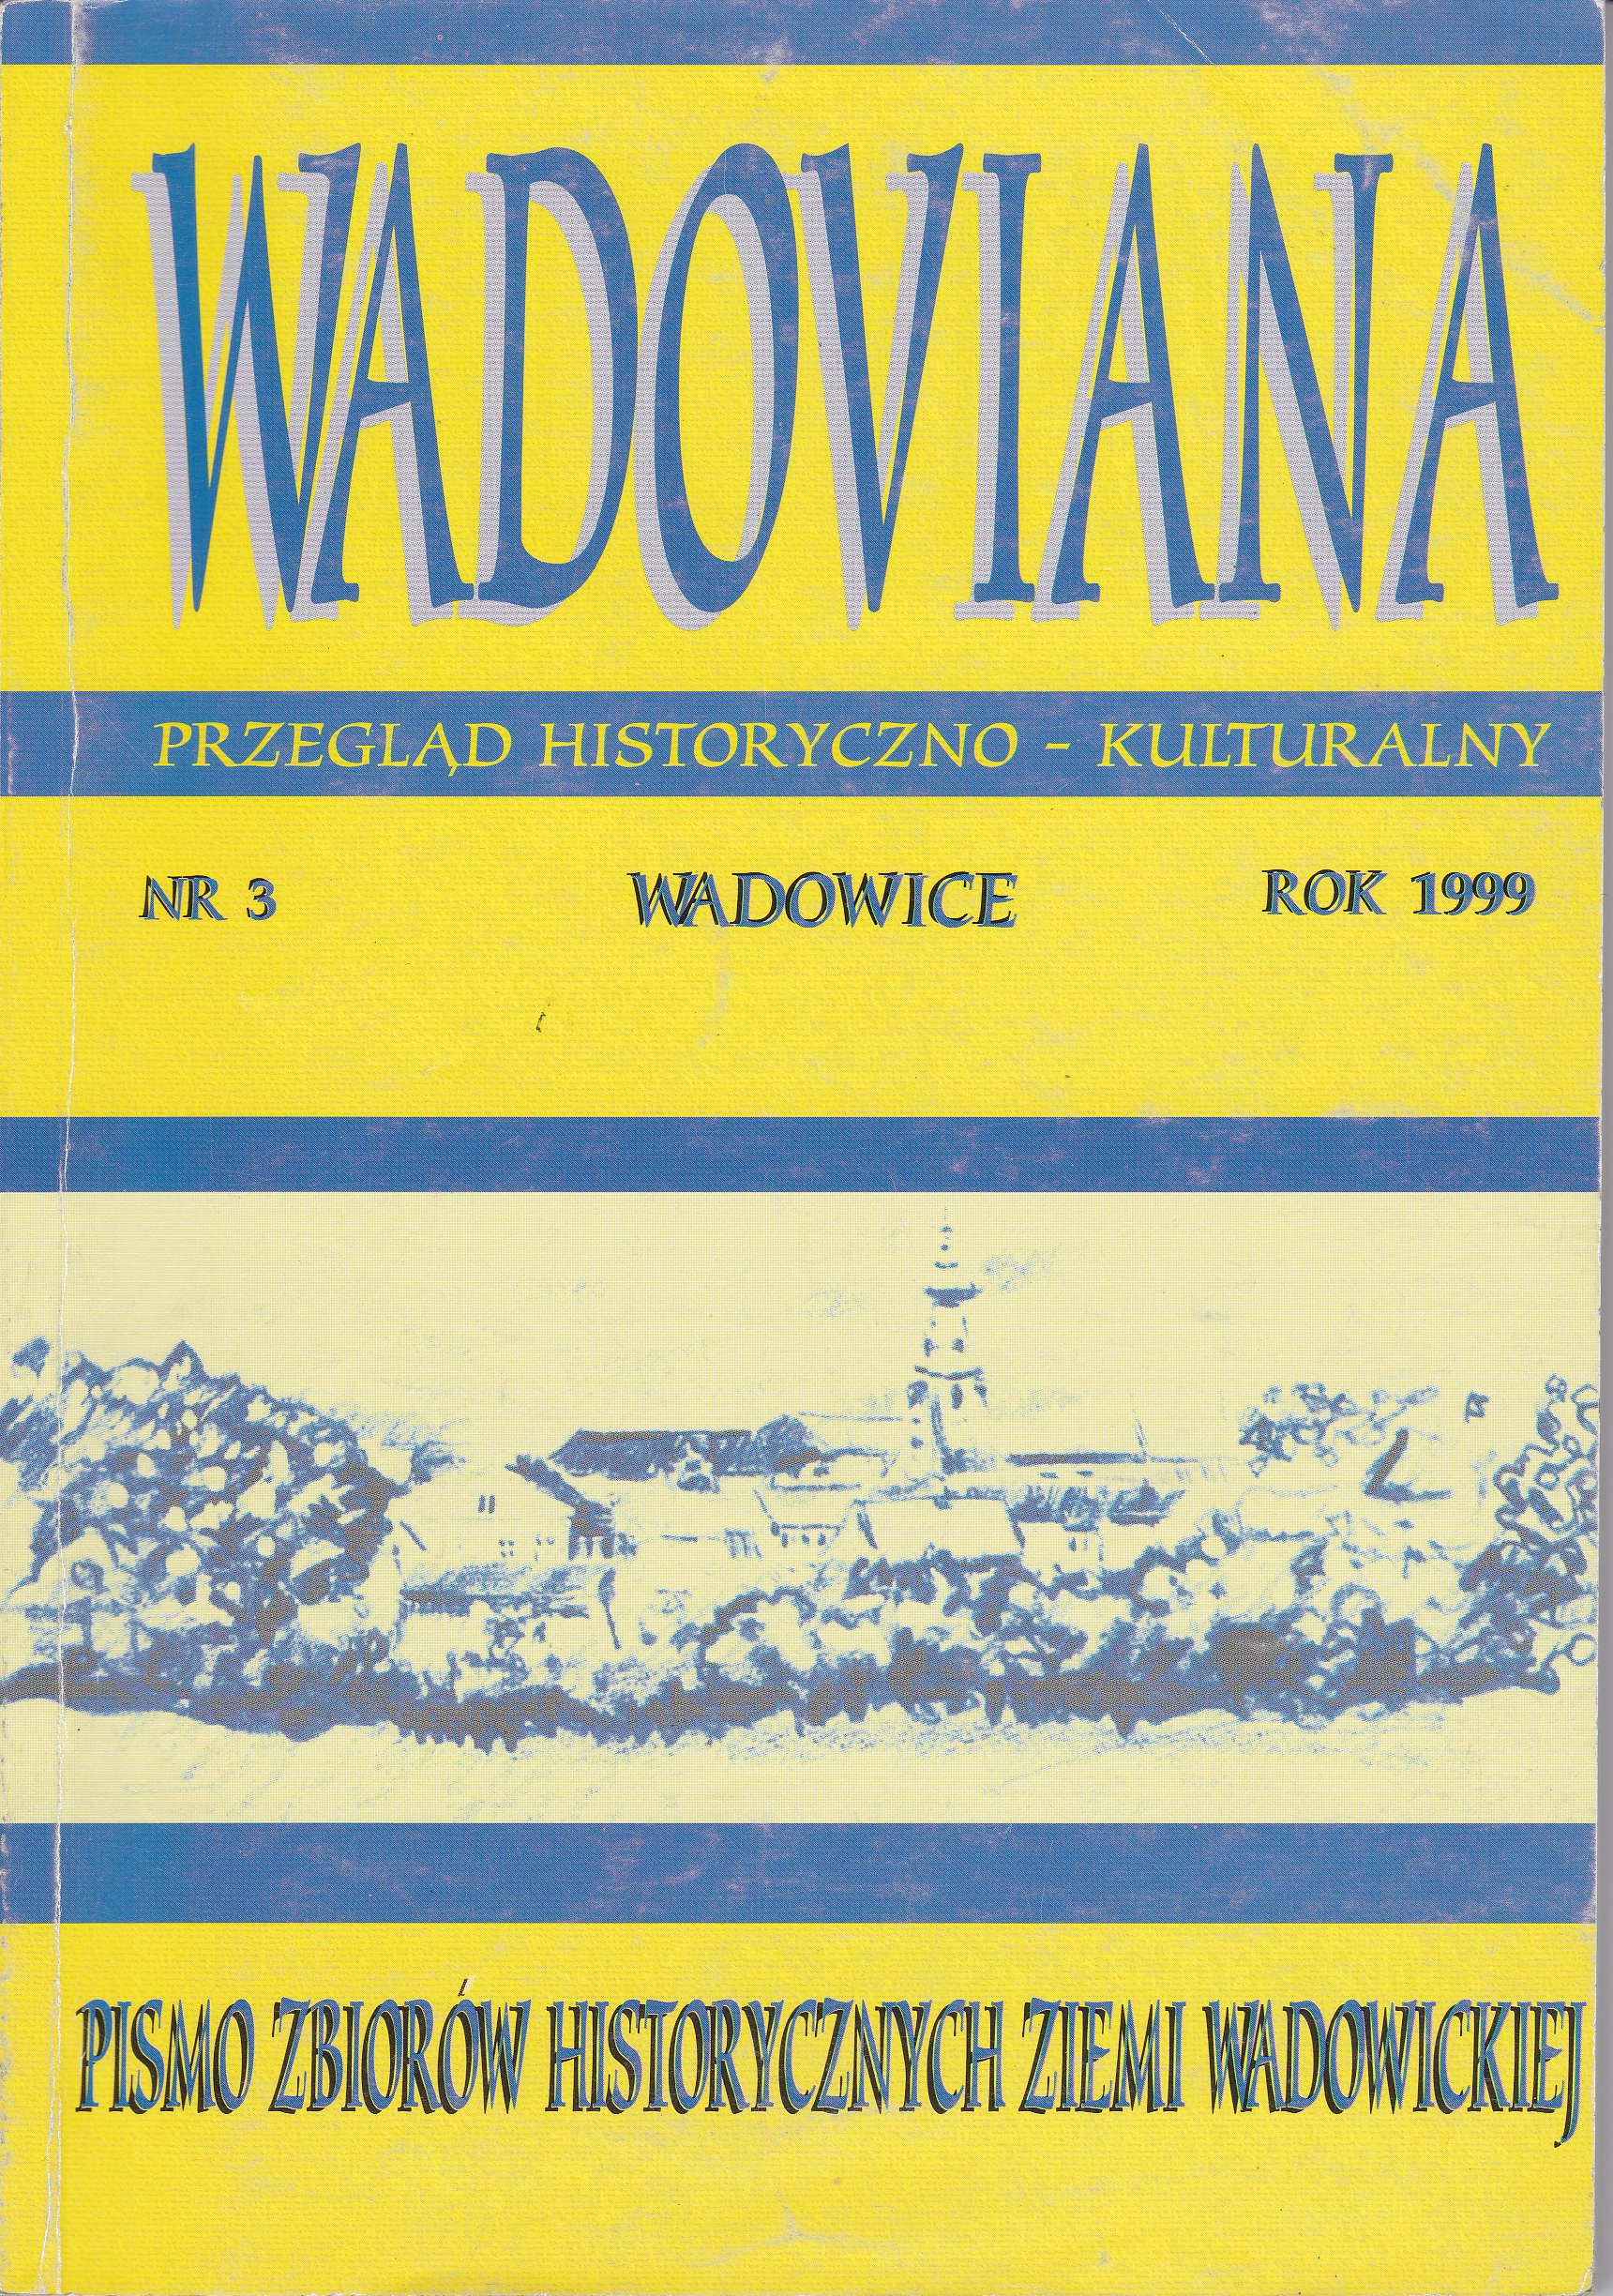 Cream cakes in Wadowice Cover Image